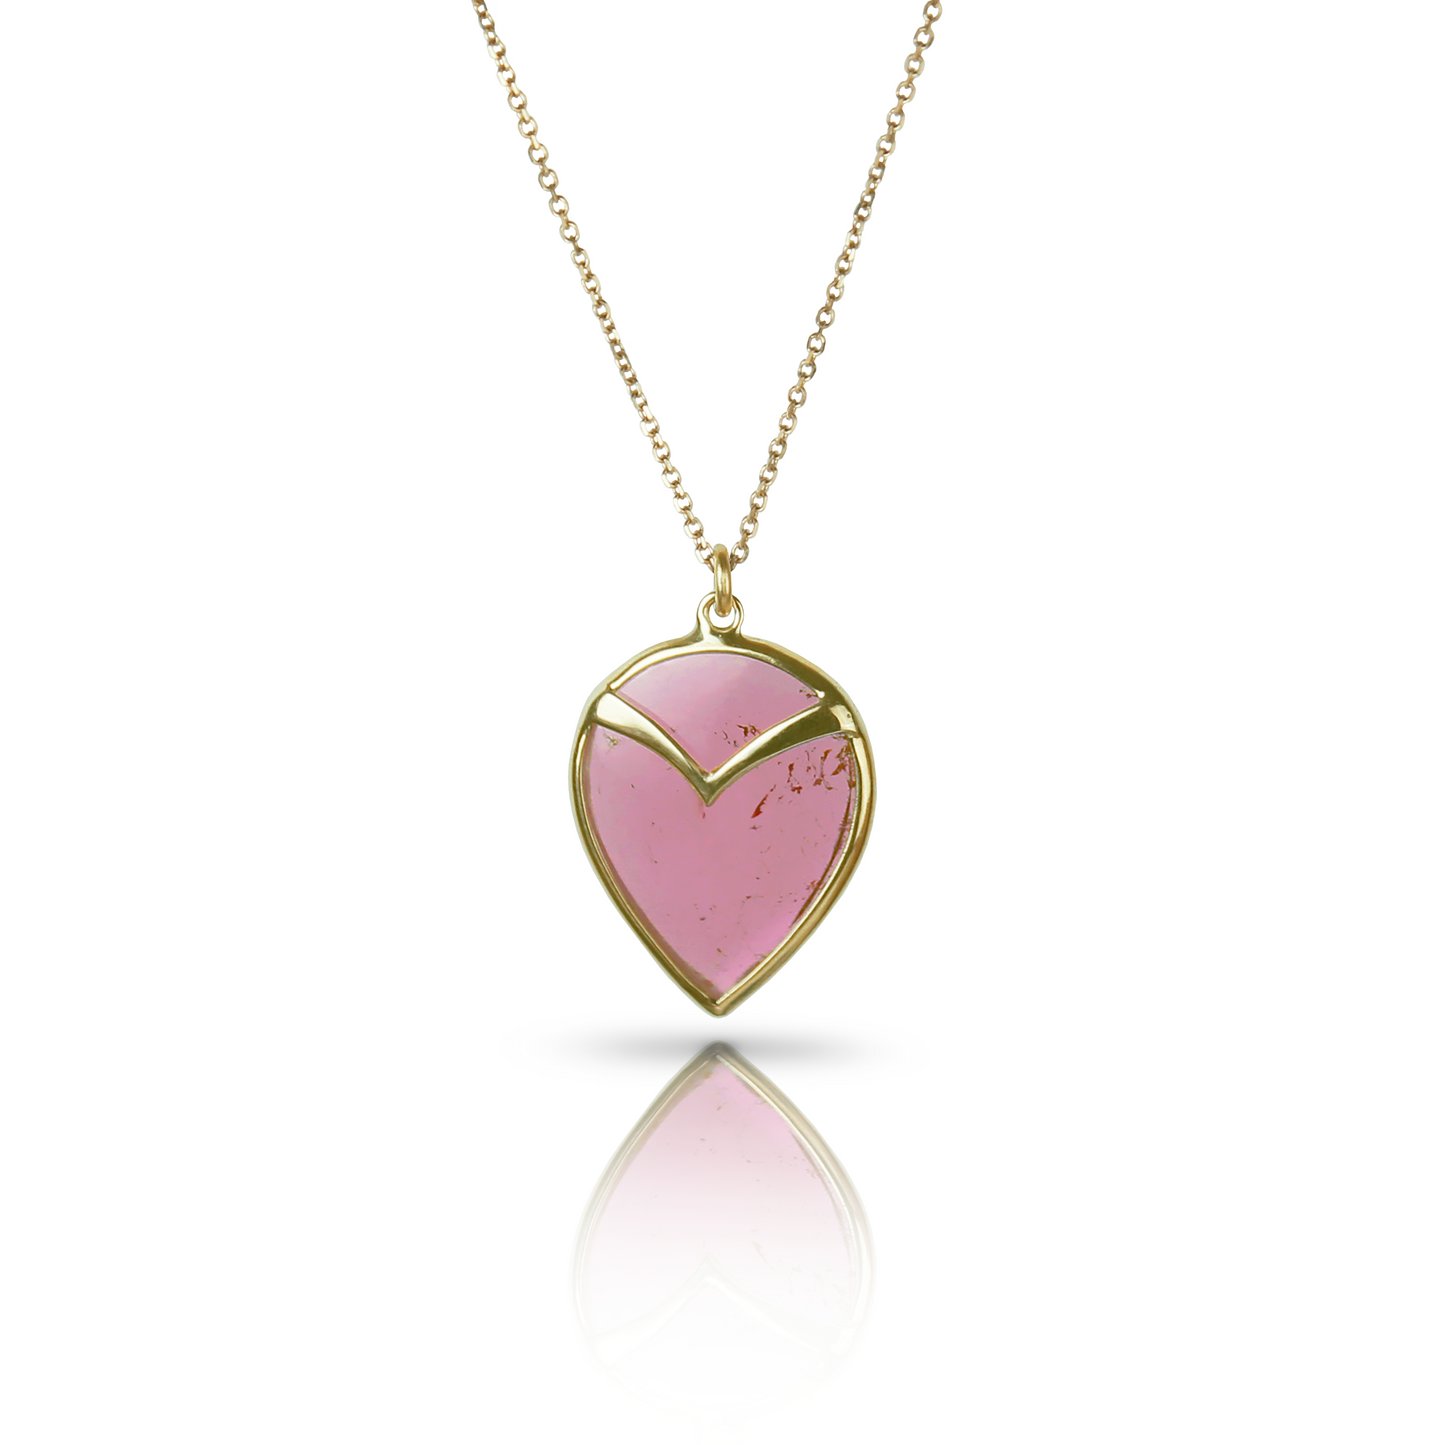 Gold Necklace with Bezel set pink tourmaline Stone, on a Gold Chain